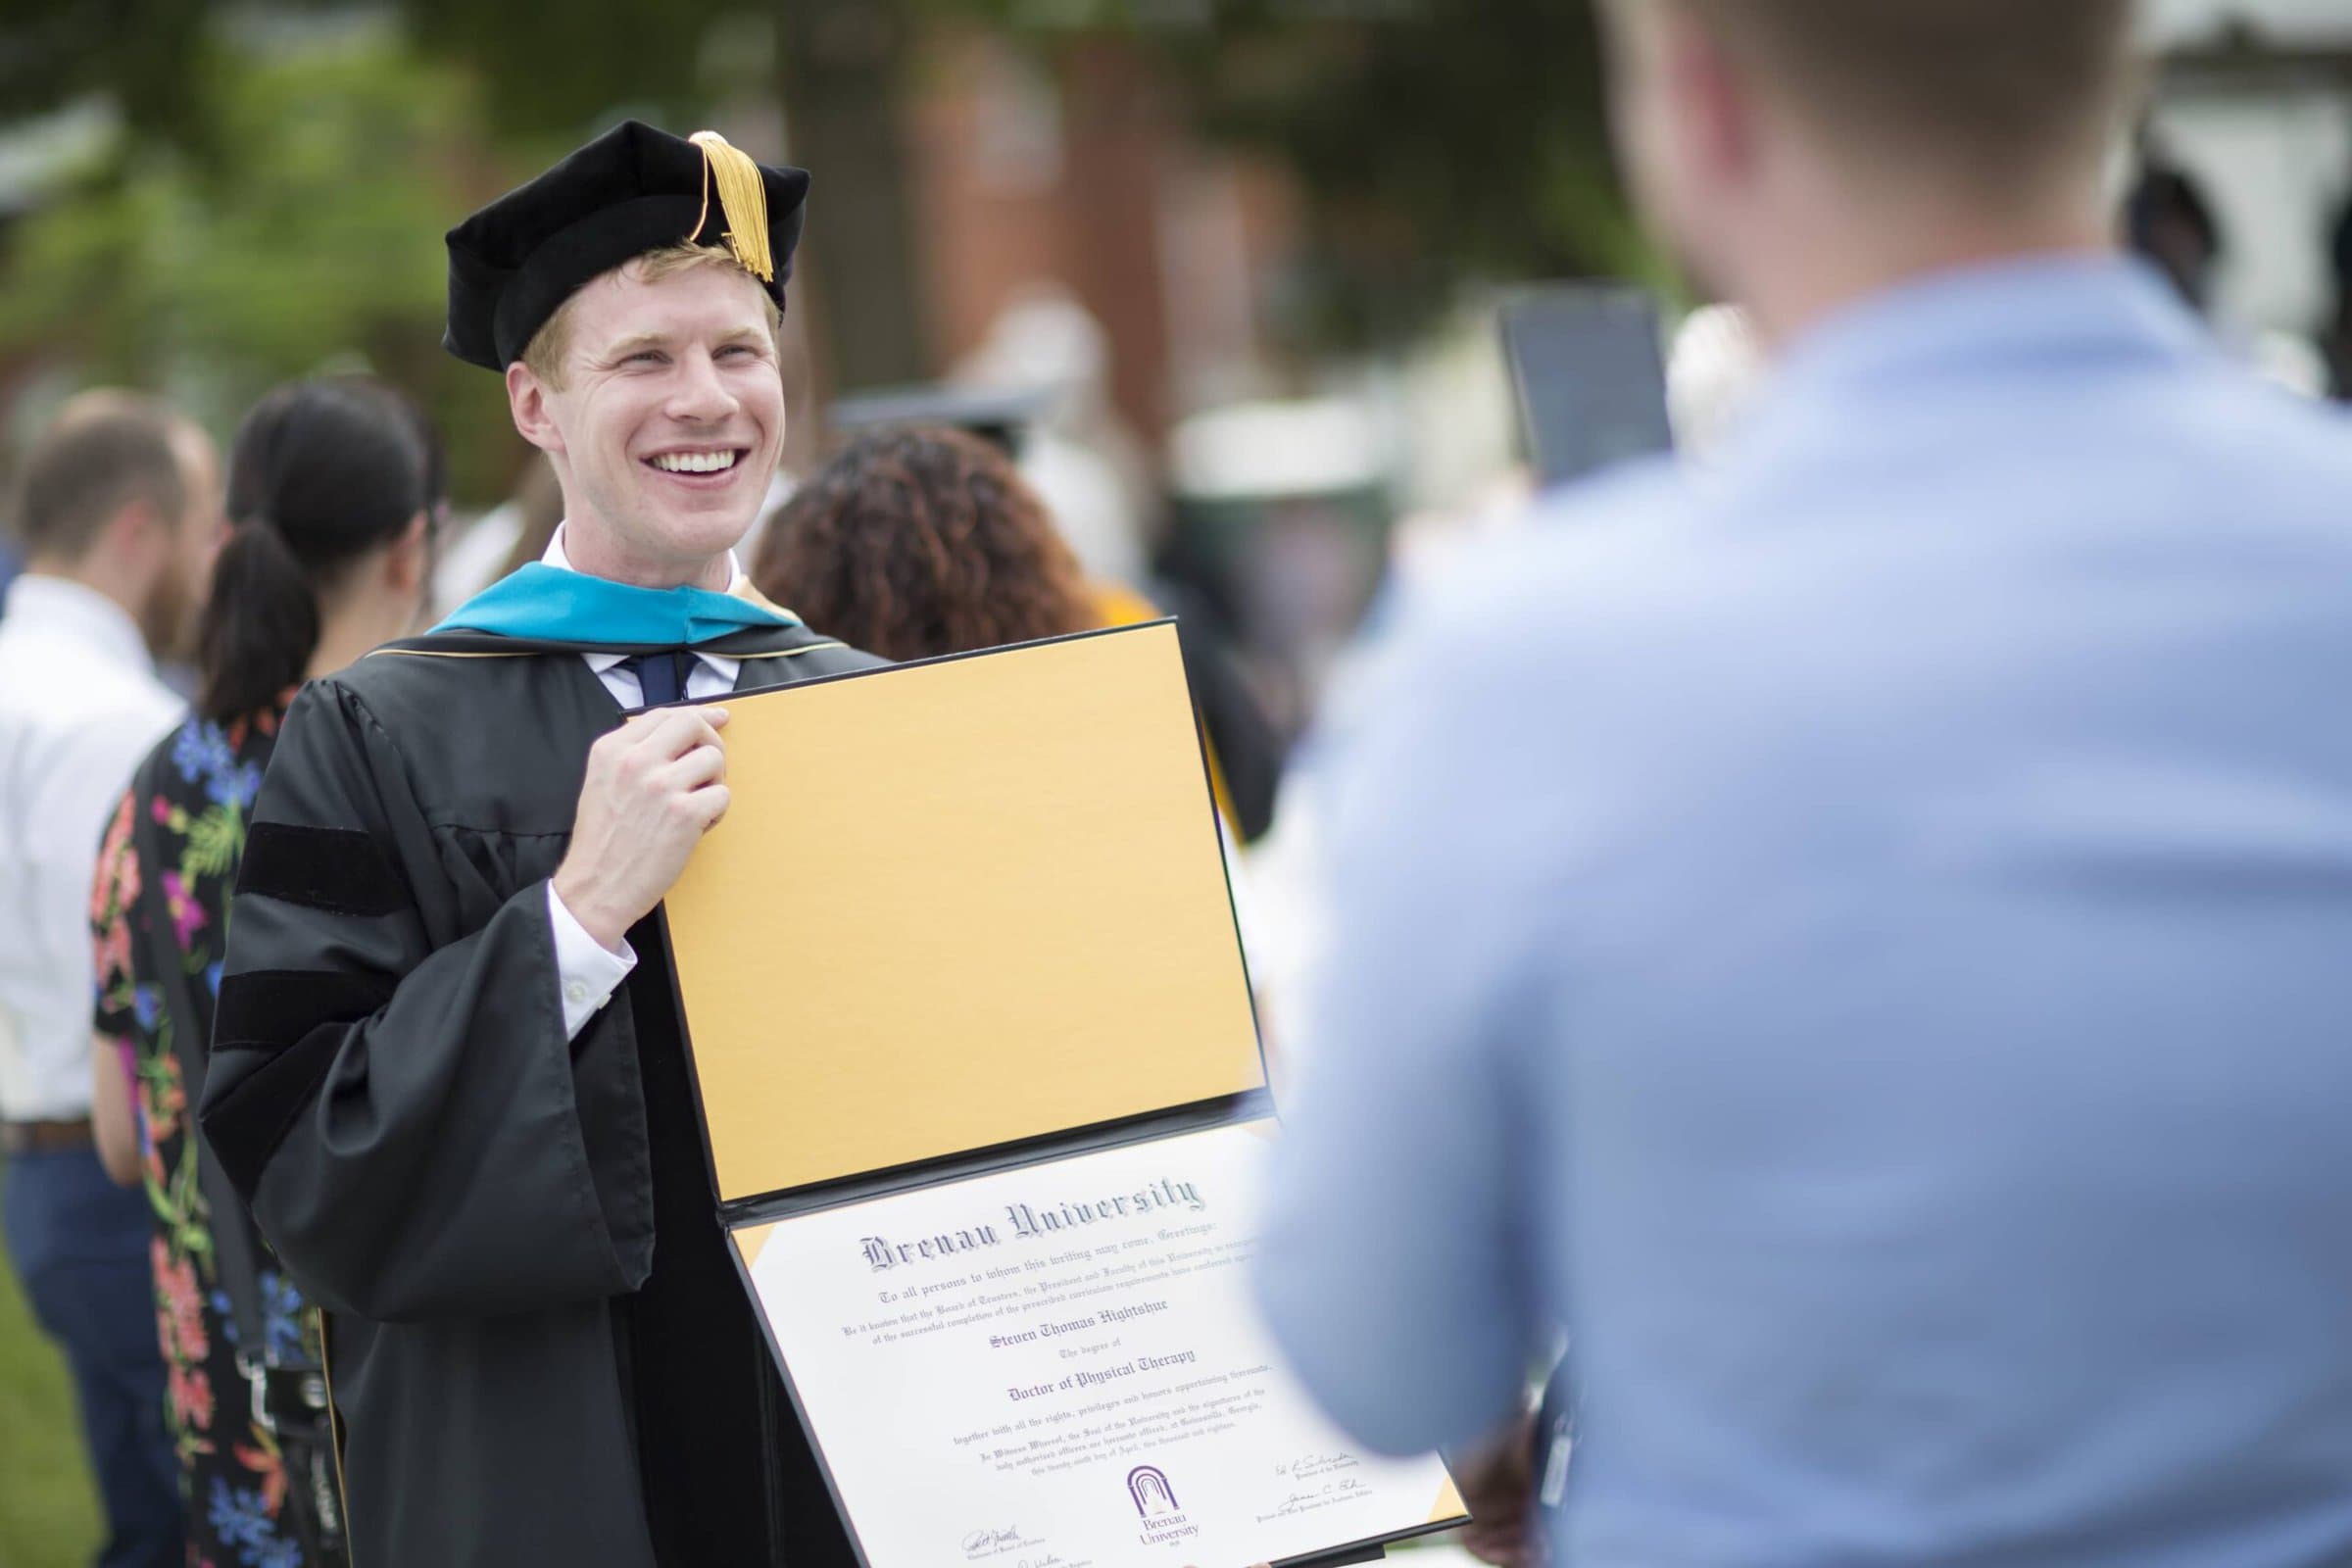 Steven Hightshue, DPT, shows off his diploma for his brother, John Hightshue, following the 2018 Spring Commencement Ceremony on Saturday, May 5, on Brenau University's historic Gainesville campus. (Nick Bowman for Brenau University)